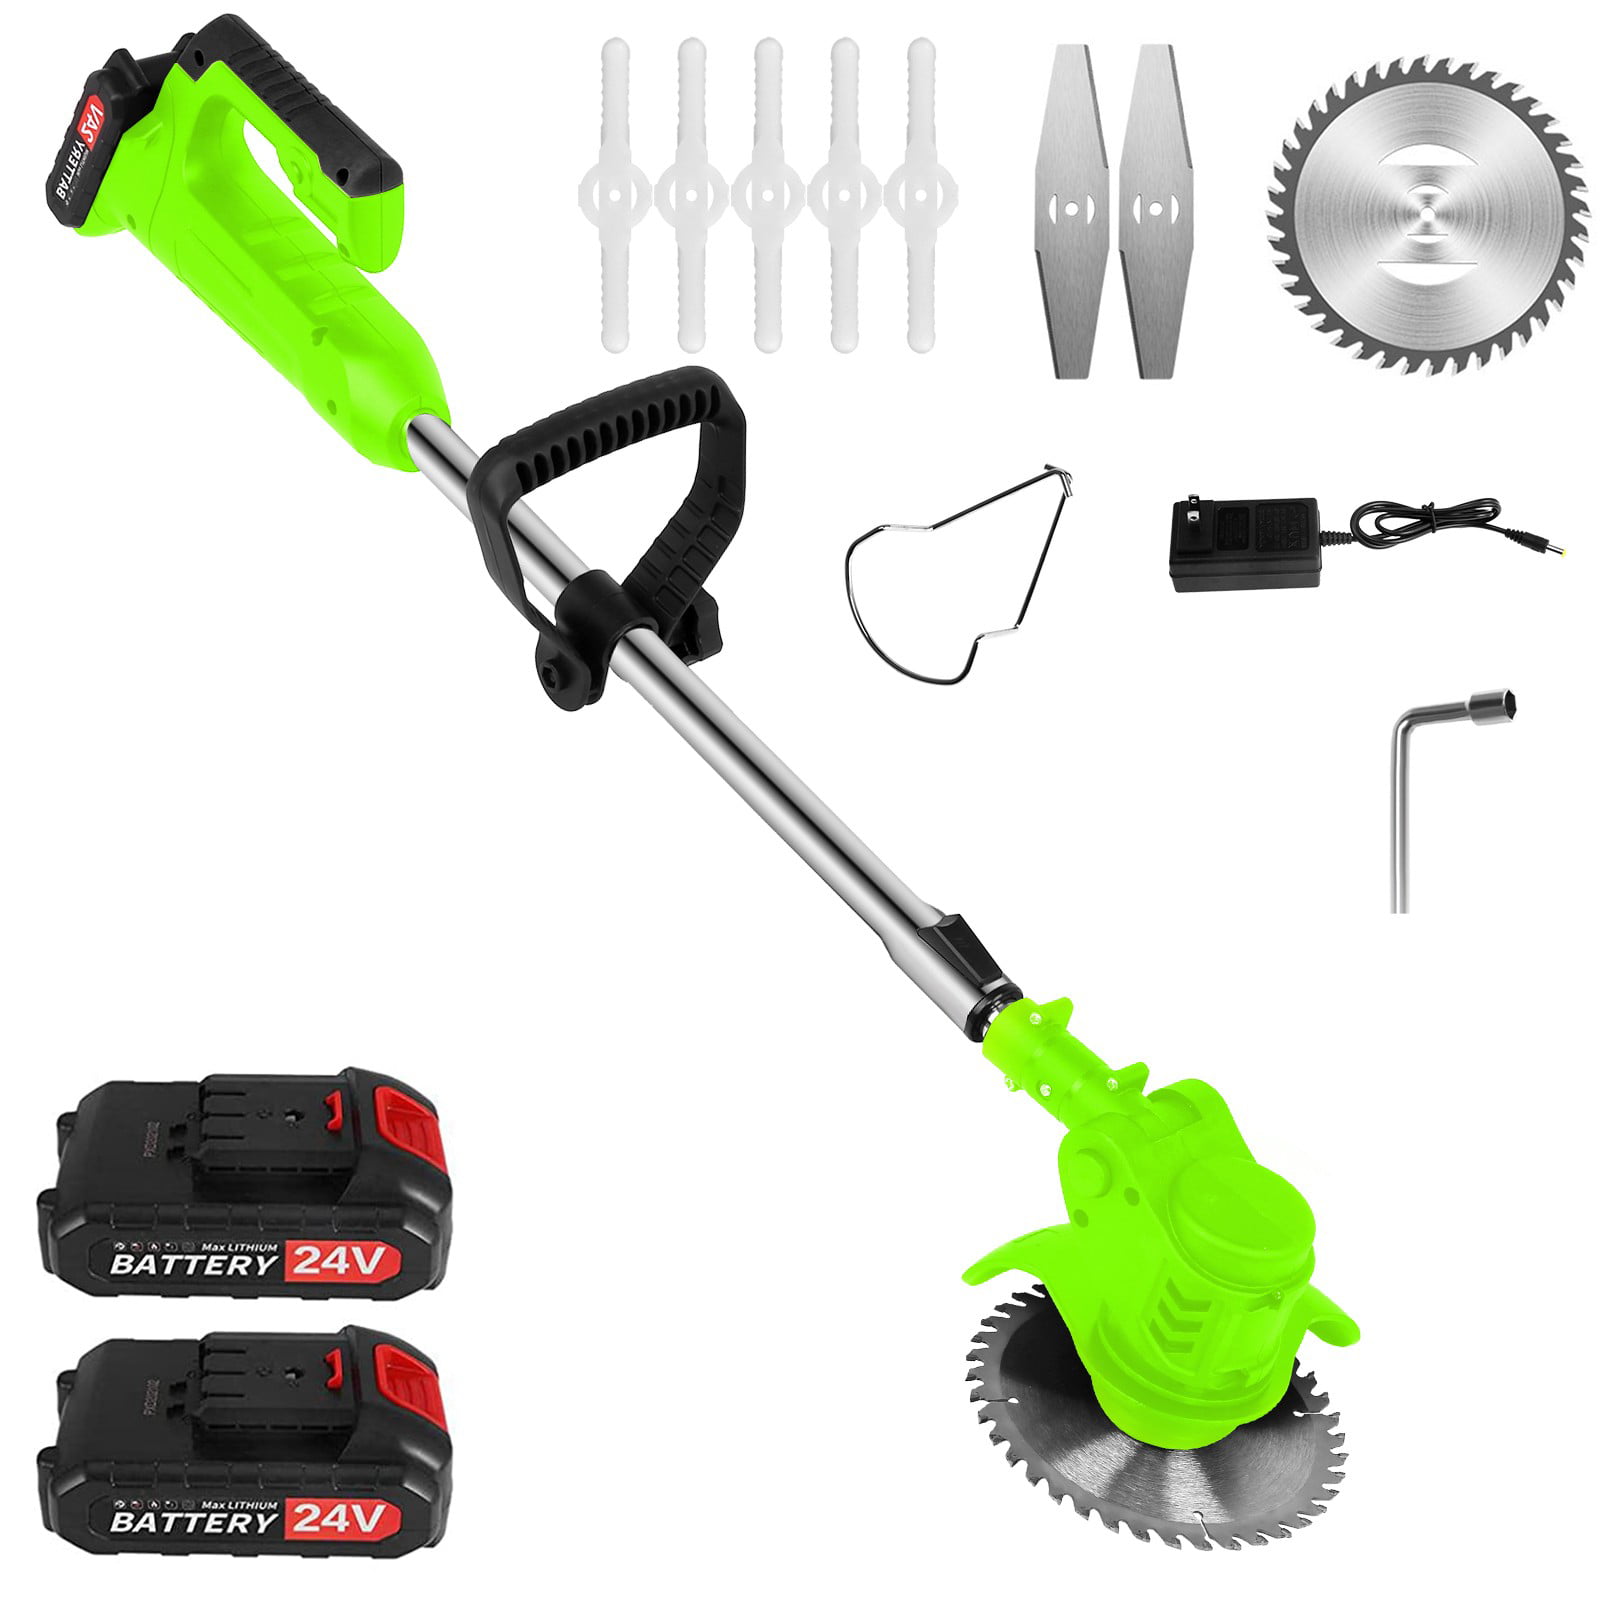 3.5lbs Lightweight Weed Eater Lawn Trimmer for Mowing Cordless String Trimmer KIMO 2-in-1 String Trimmer/Edger Battery Powered & Fast Charger 20V Grass Trimmer for Multi-Angle Adjustment Cutting